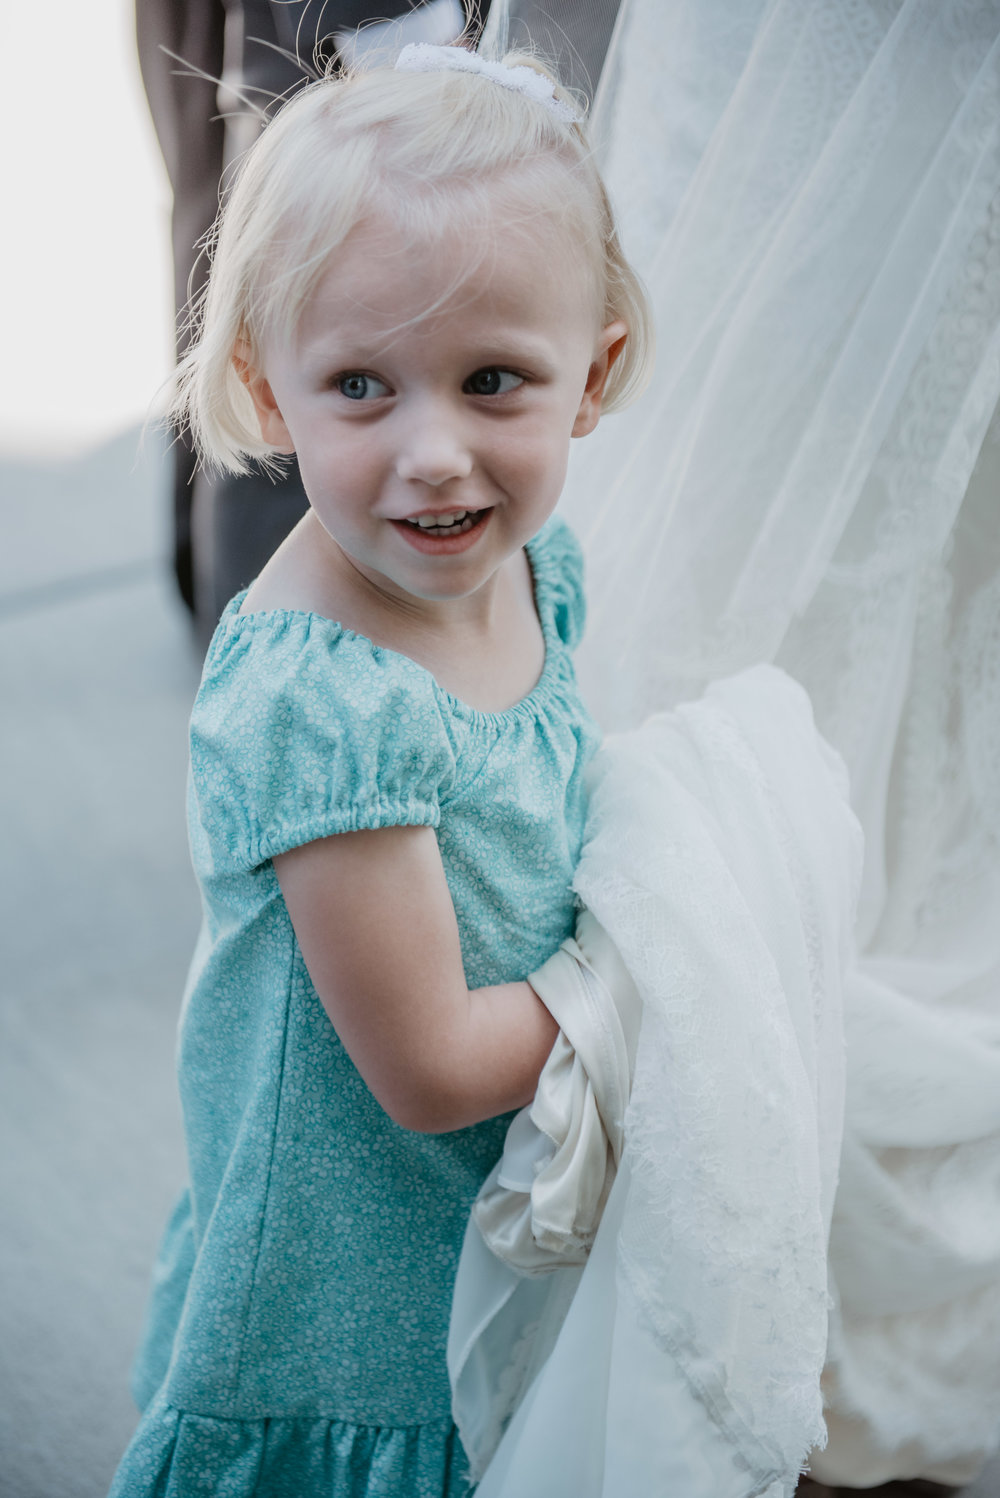 Jocilyn Bennett Photography | Utah Bride | LDS Bride | Utah Wedding Photography | When Two Become One | LDS civil wedding ceremony | Blending religions in families | Capturing Raw and Genuine Emotion | Combining Traditions | LDS Logan Temple | Temple Sealing | Little Girl Holding Bride’s Train |